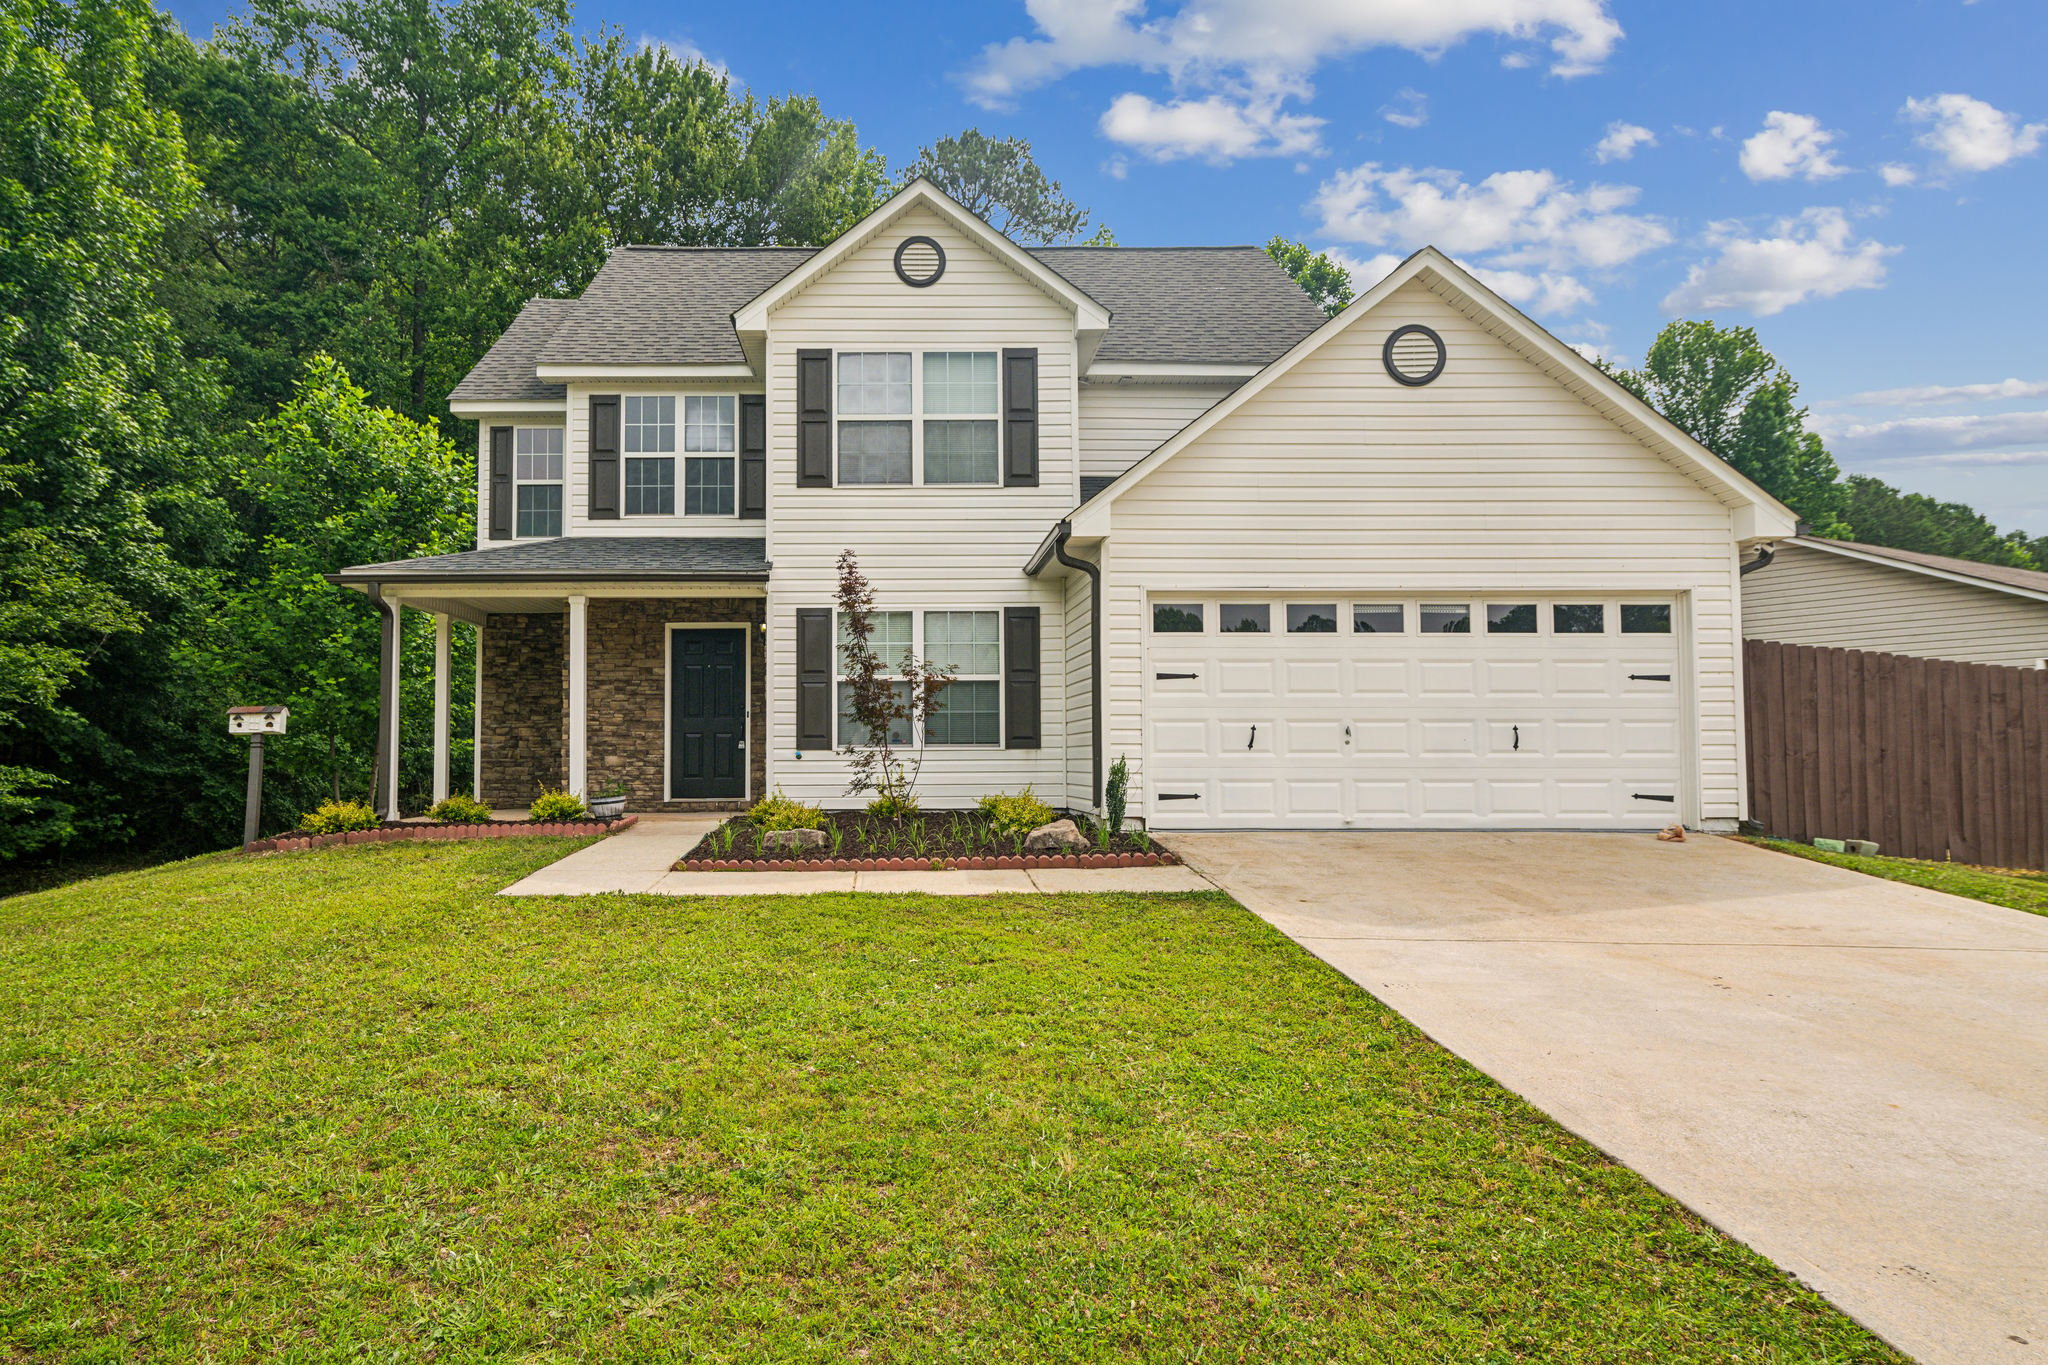 Residential real estate photo of home in Covington, GA